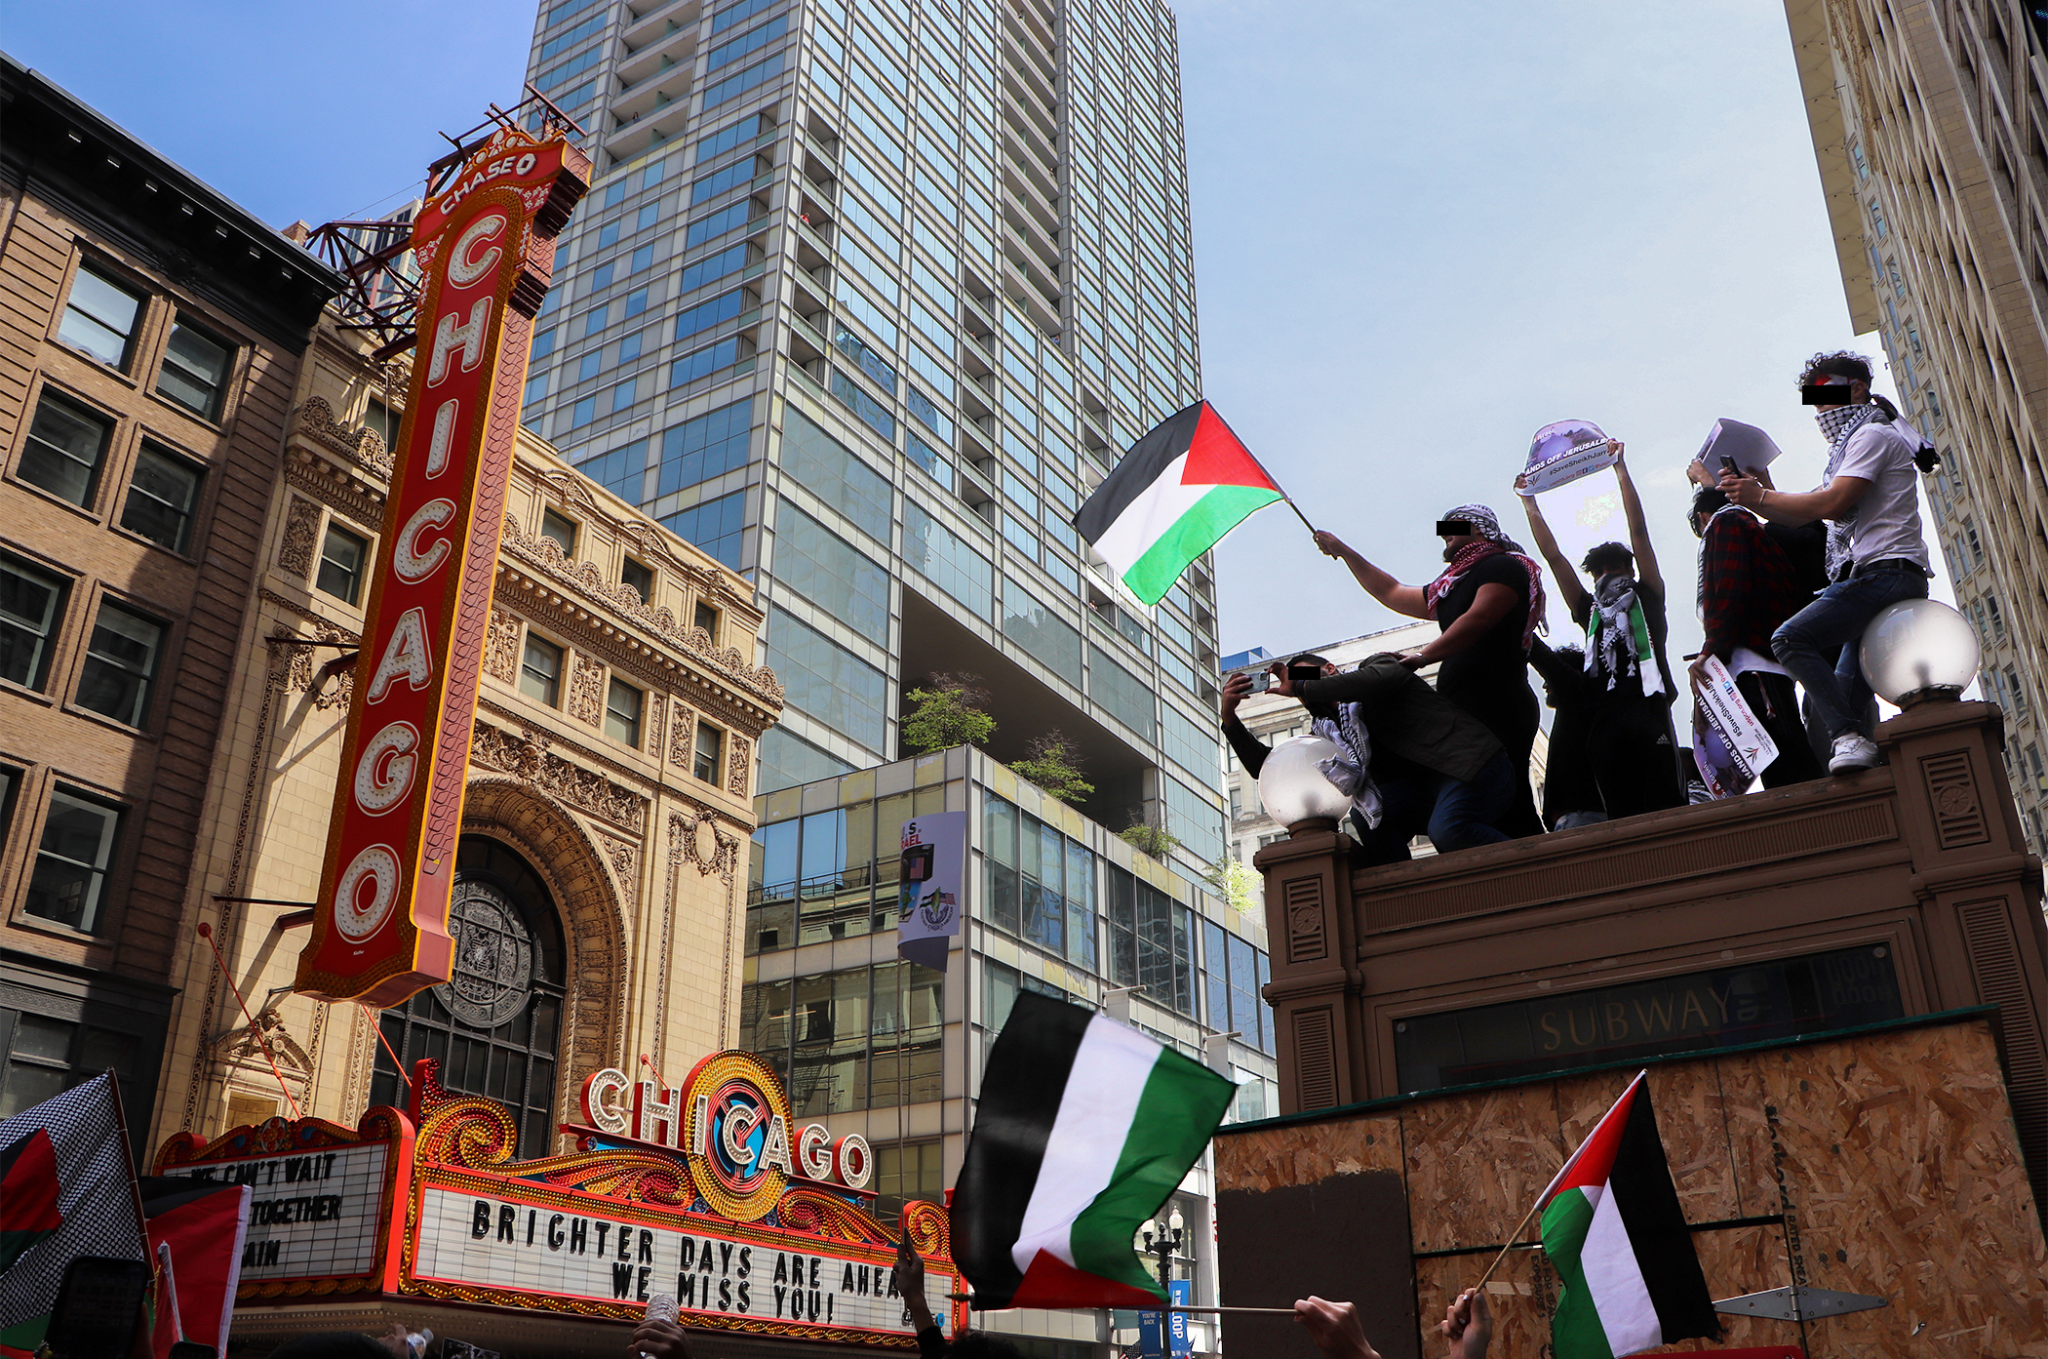 Some demonstrators scale an entrance to the ‘L’ to wave Palestinian flags above the group as they march on May 16, 2021 in Chicago. (Madison Muller/South Side Weekly)